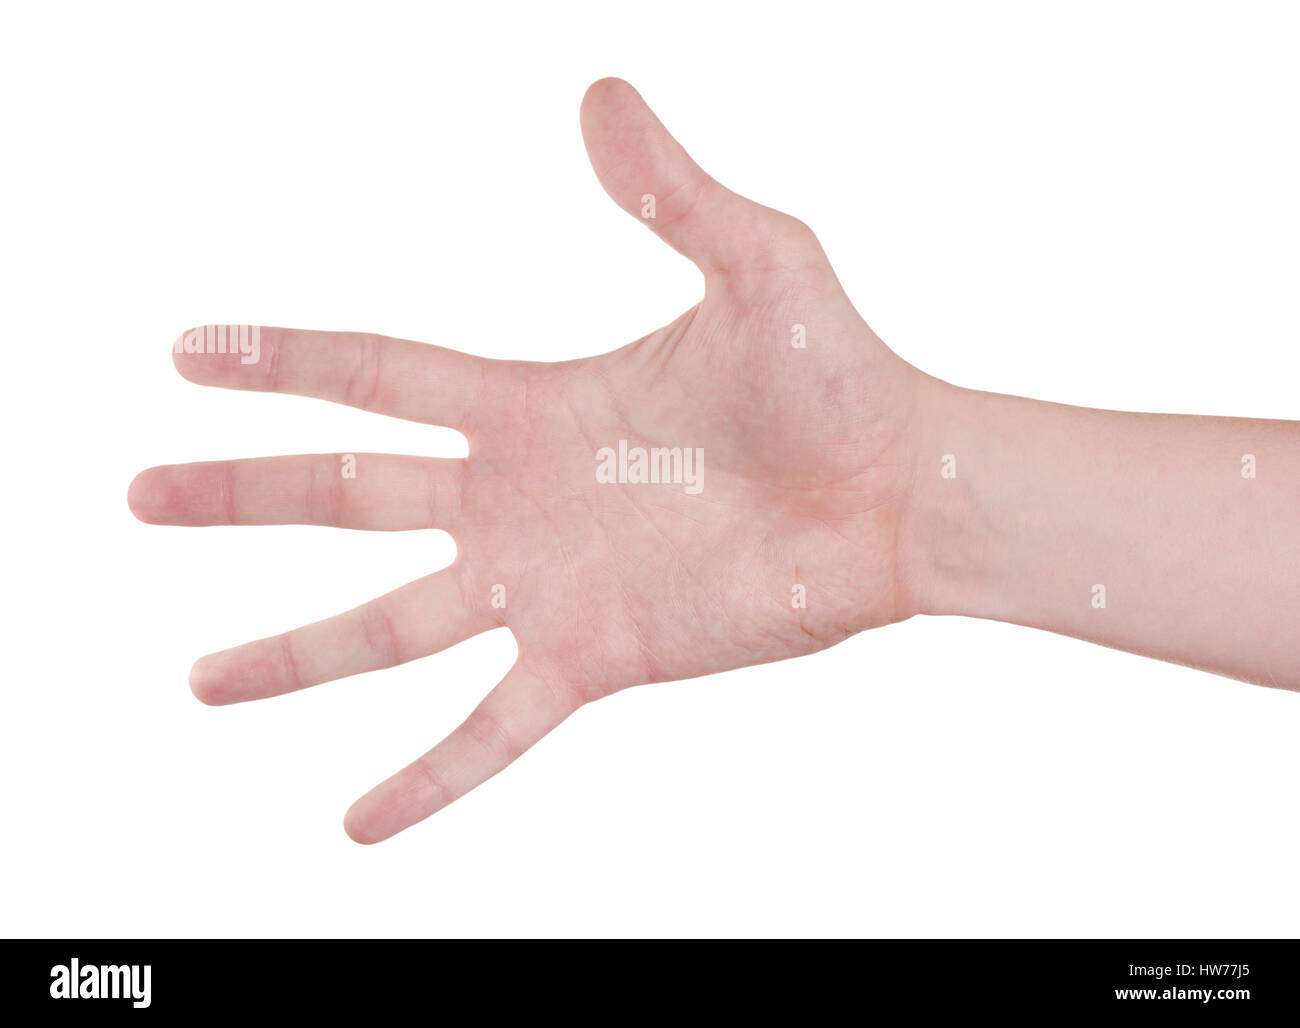 Gesture Male Hand Open Palm with Five Fingers Stock Photo - Image